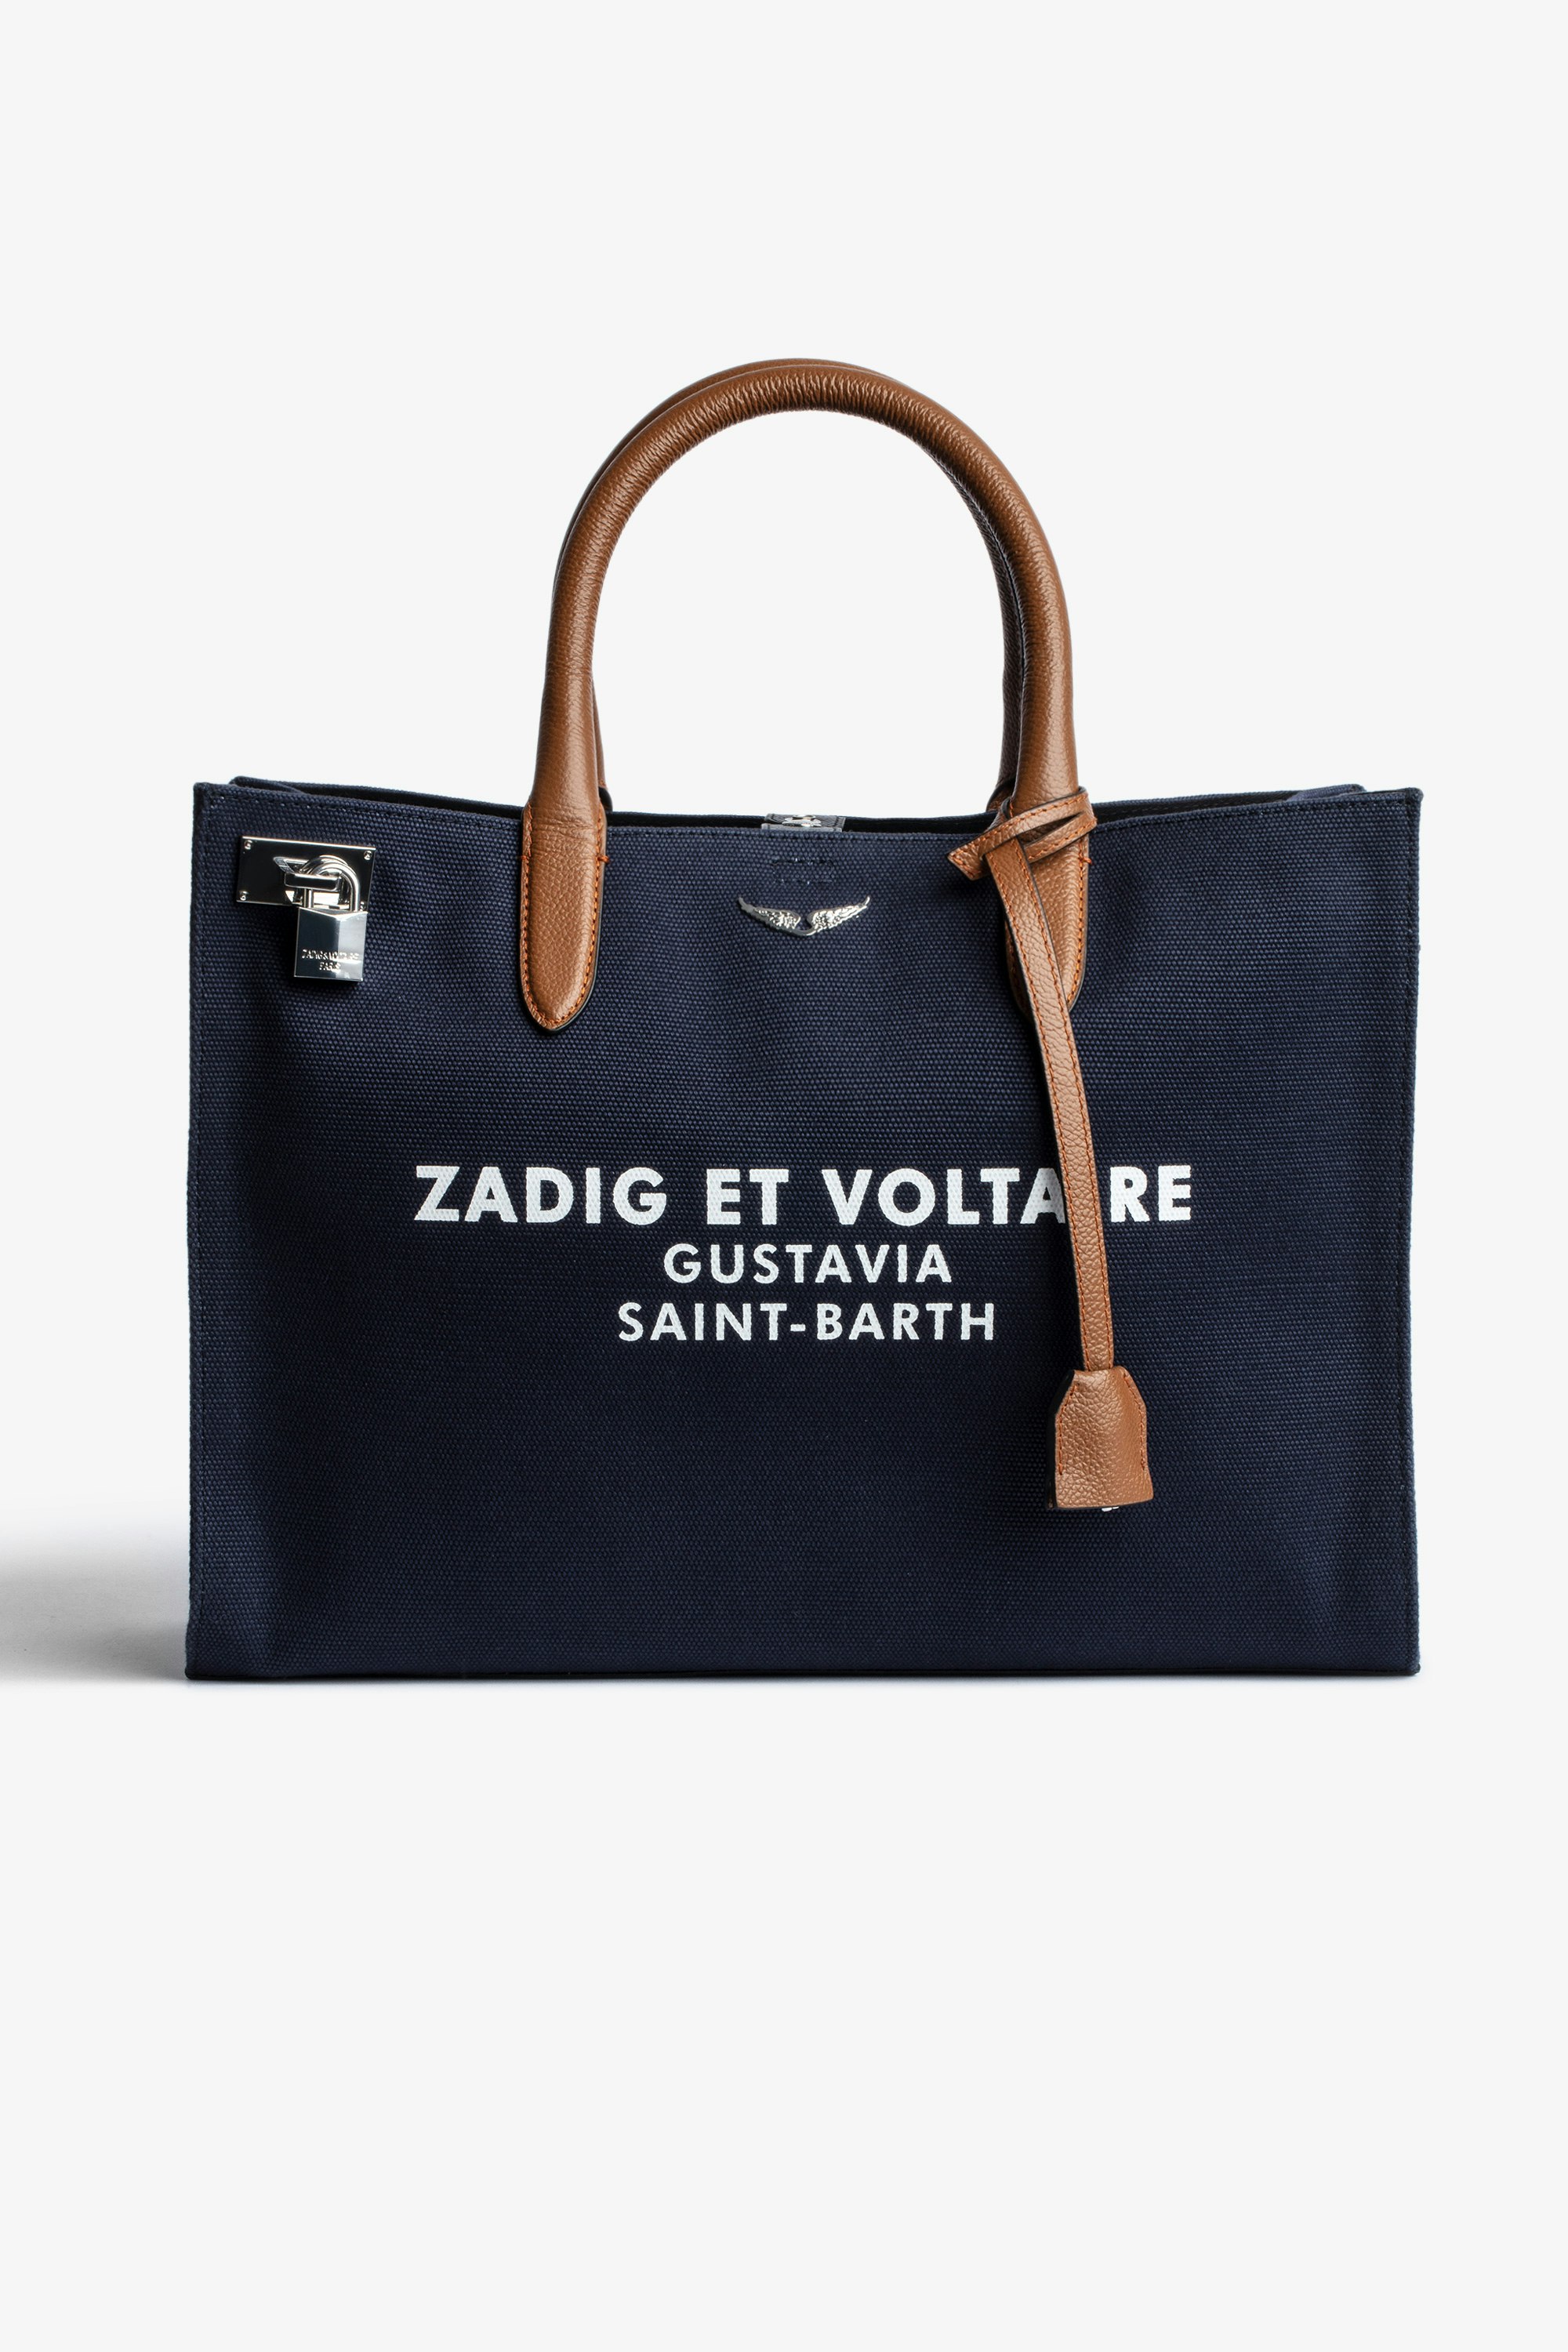 St Barts Large Candide Bag  Women’s large navy blue Candide canvas bag with St Barts print